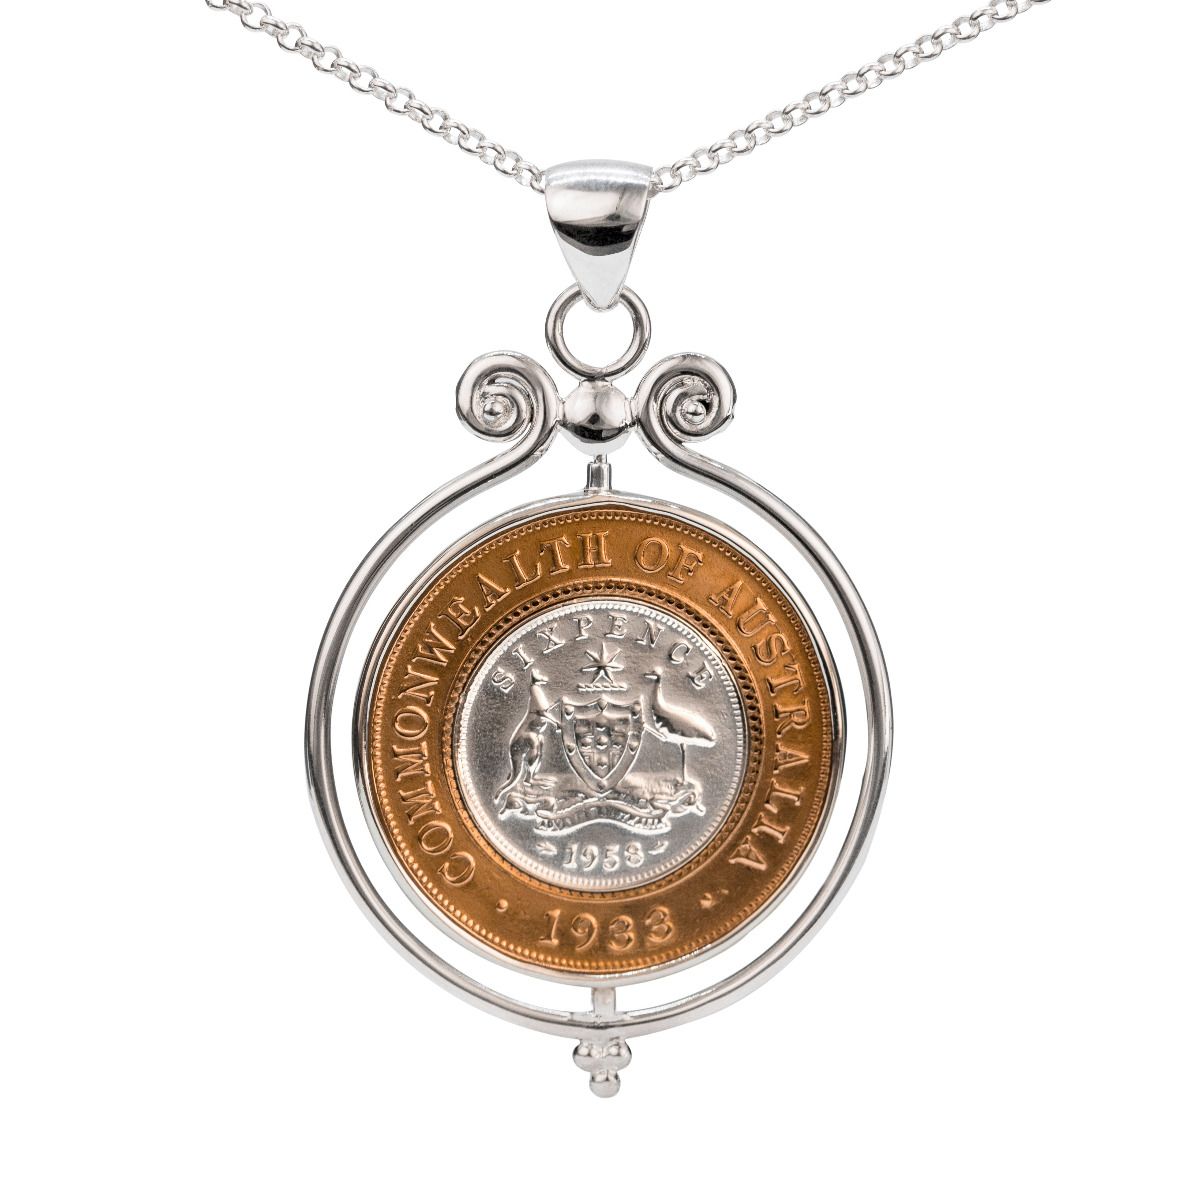 PENDANT S/S SIXPENCE/PENNY SP